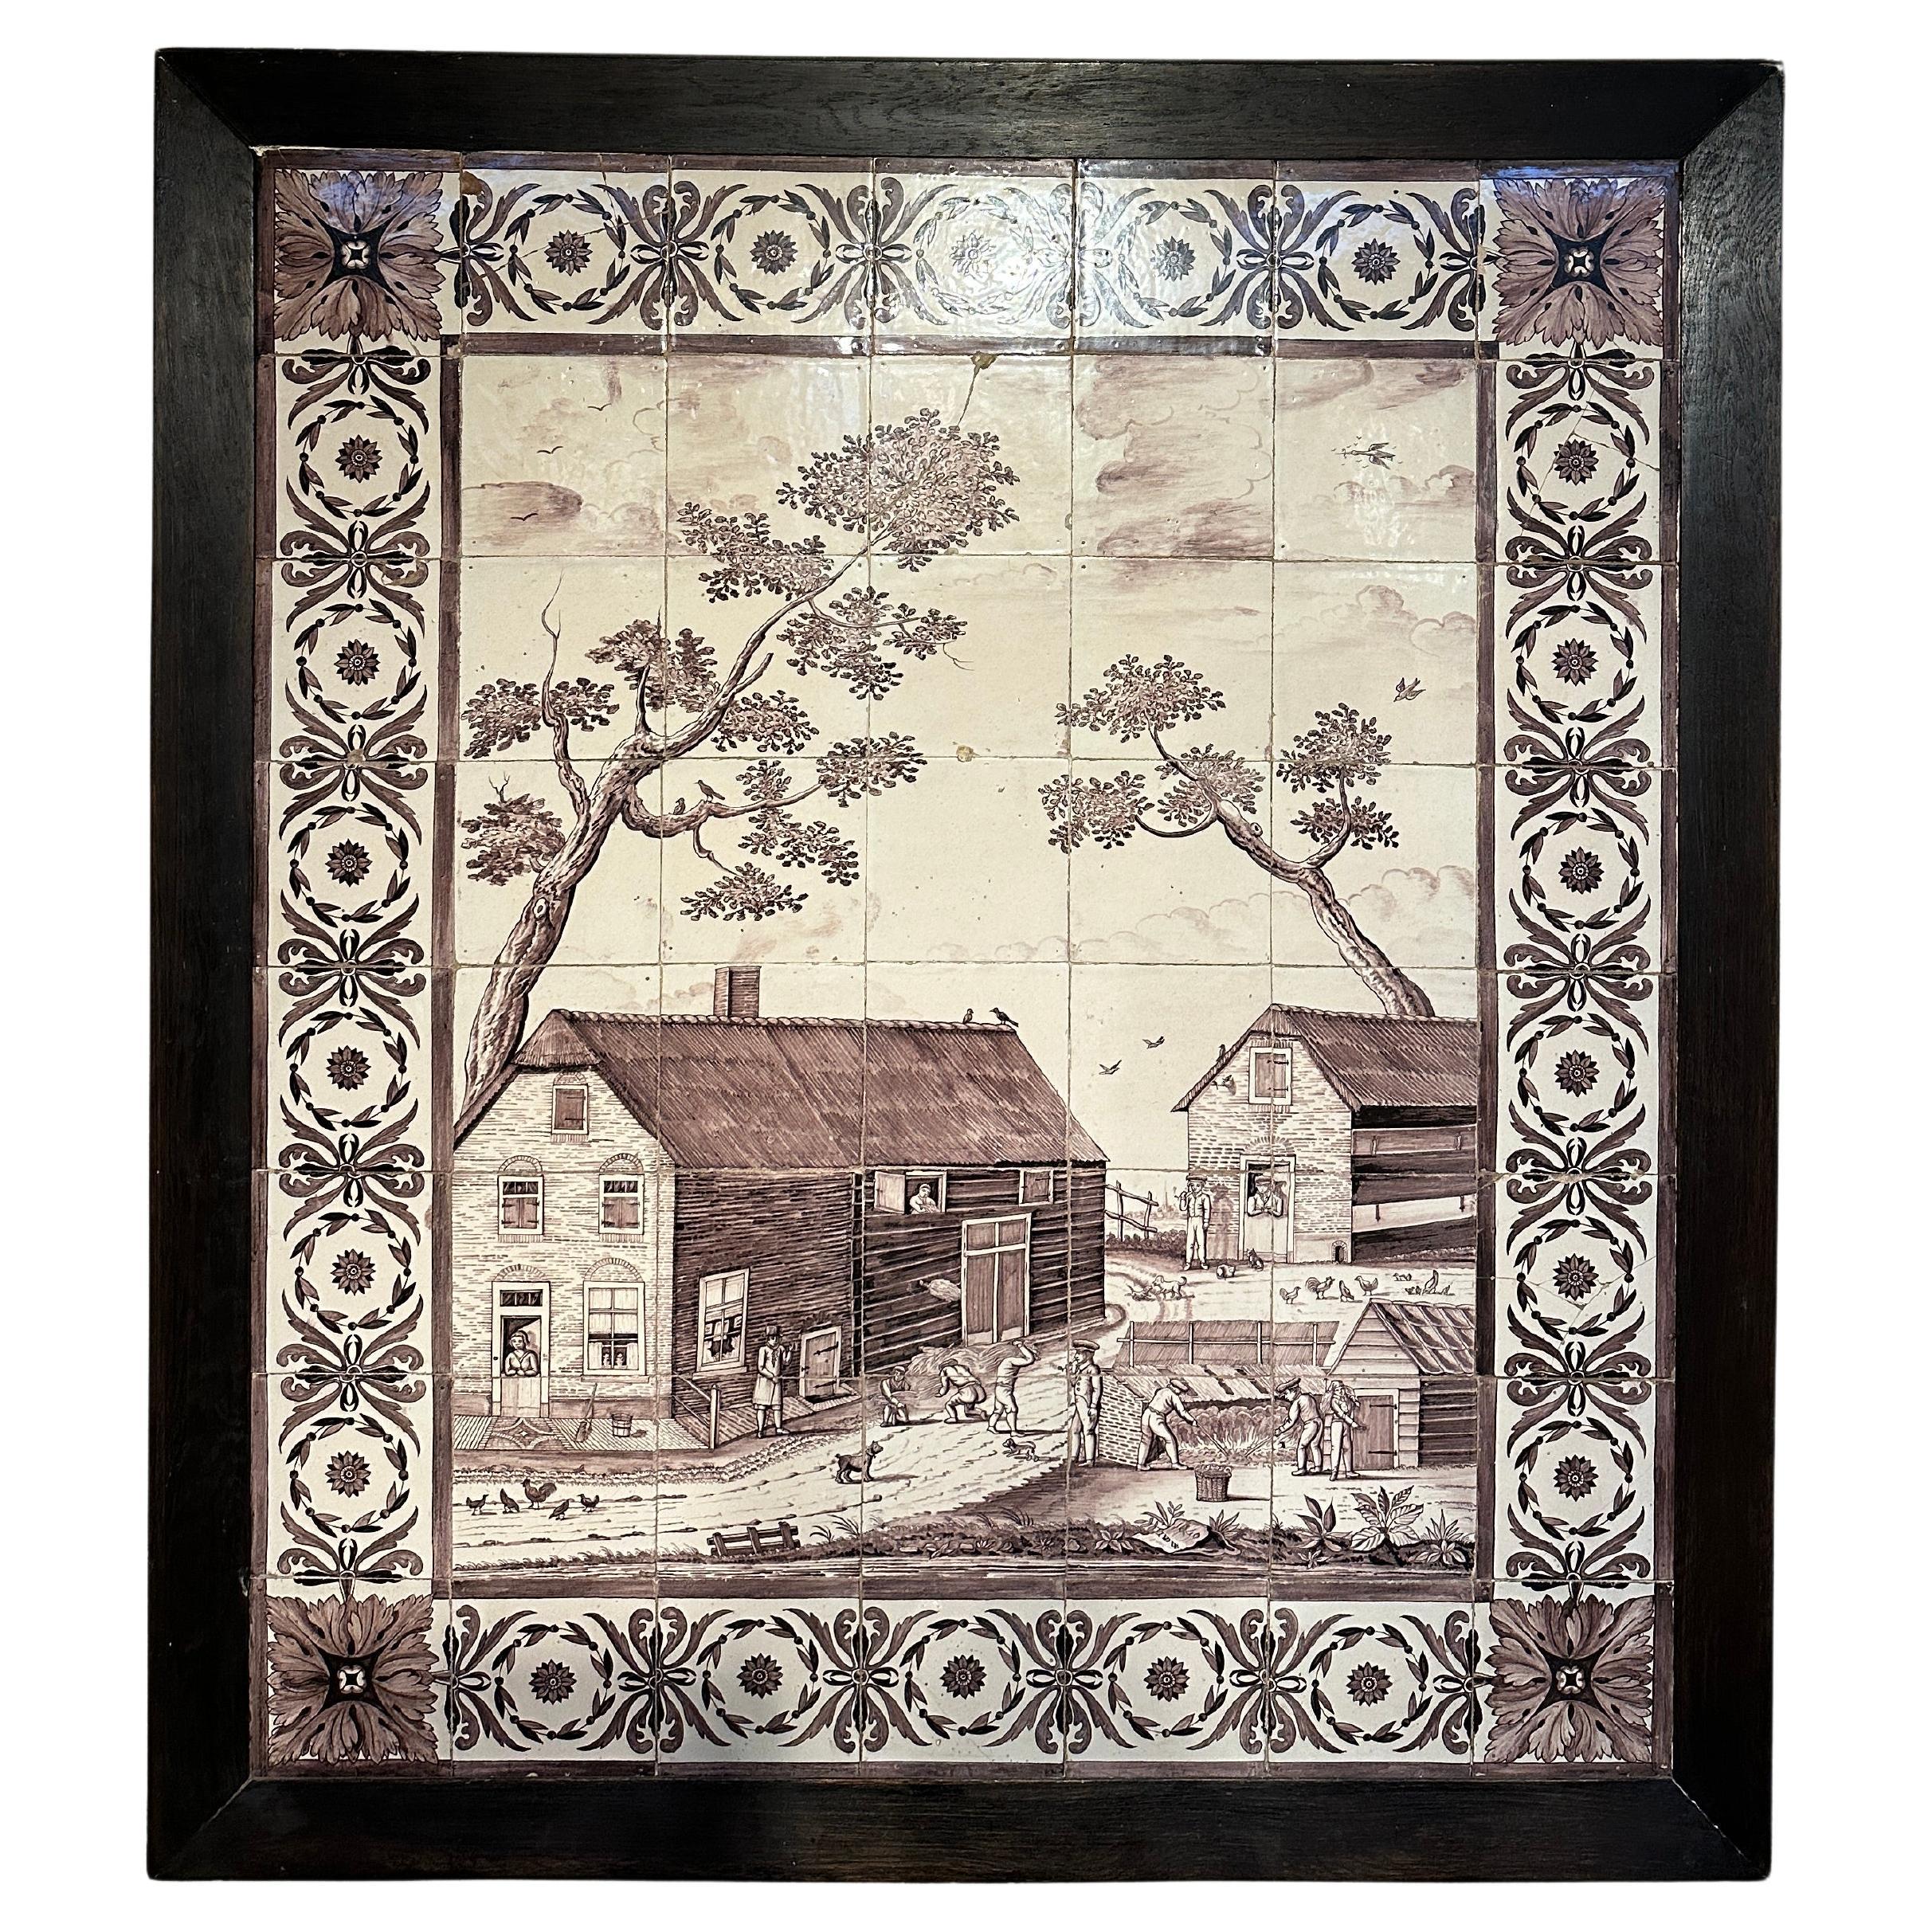 Rare and Important Dutch Tile Panel of a Dutch Farmhouse, Signed and Dated 1840